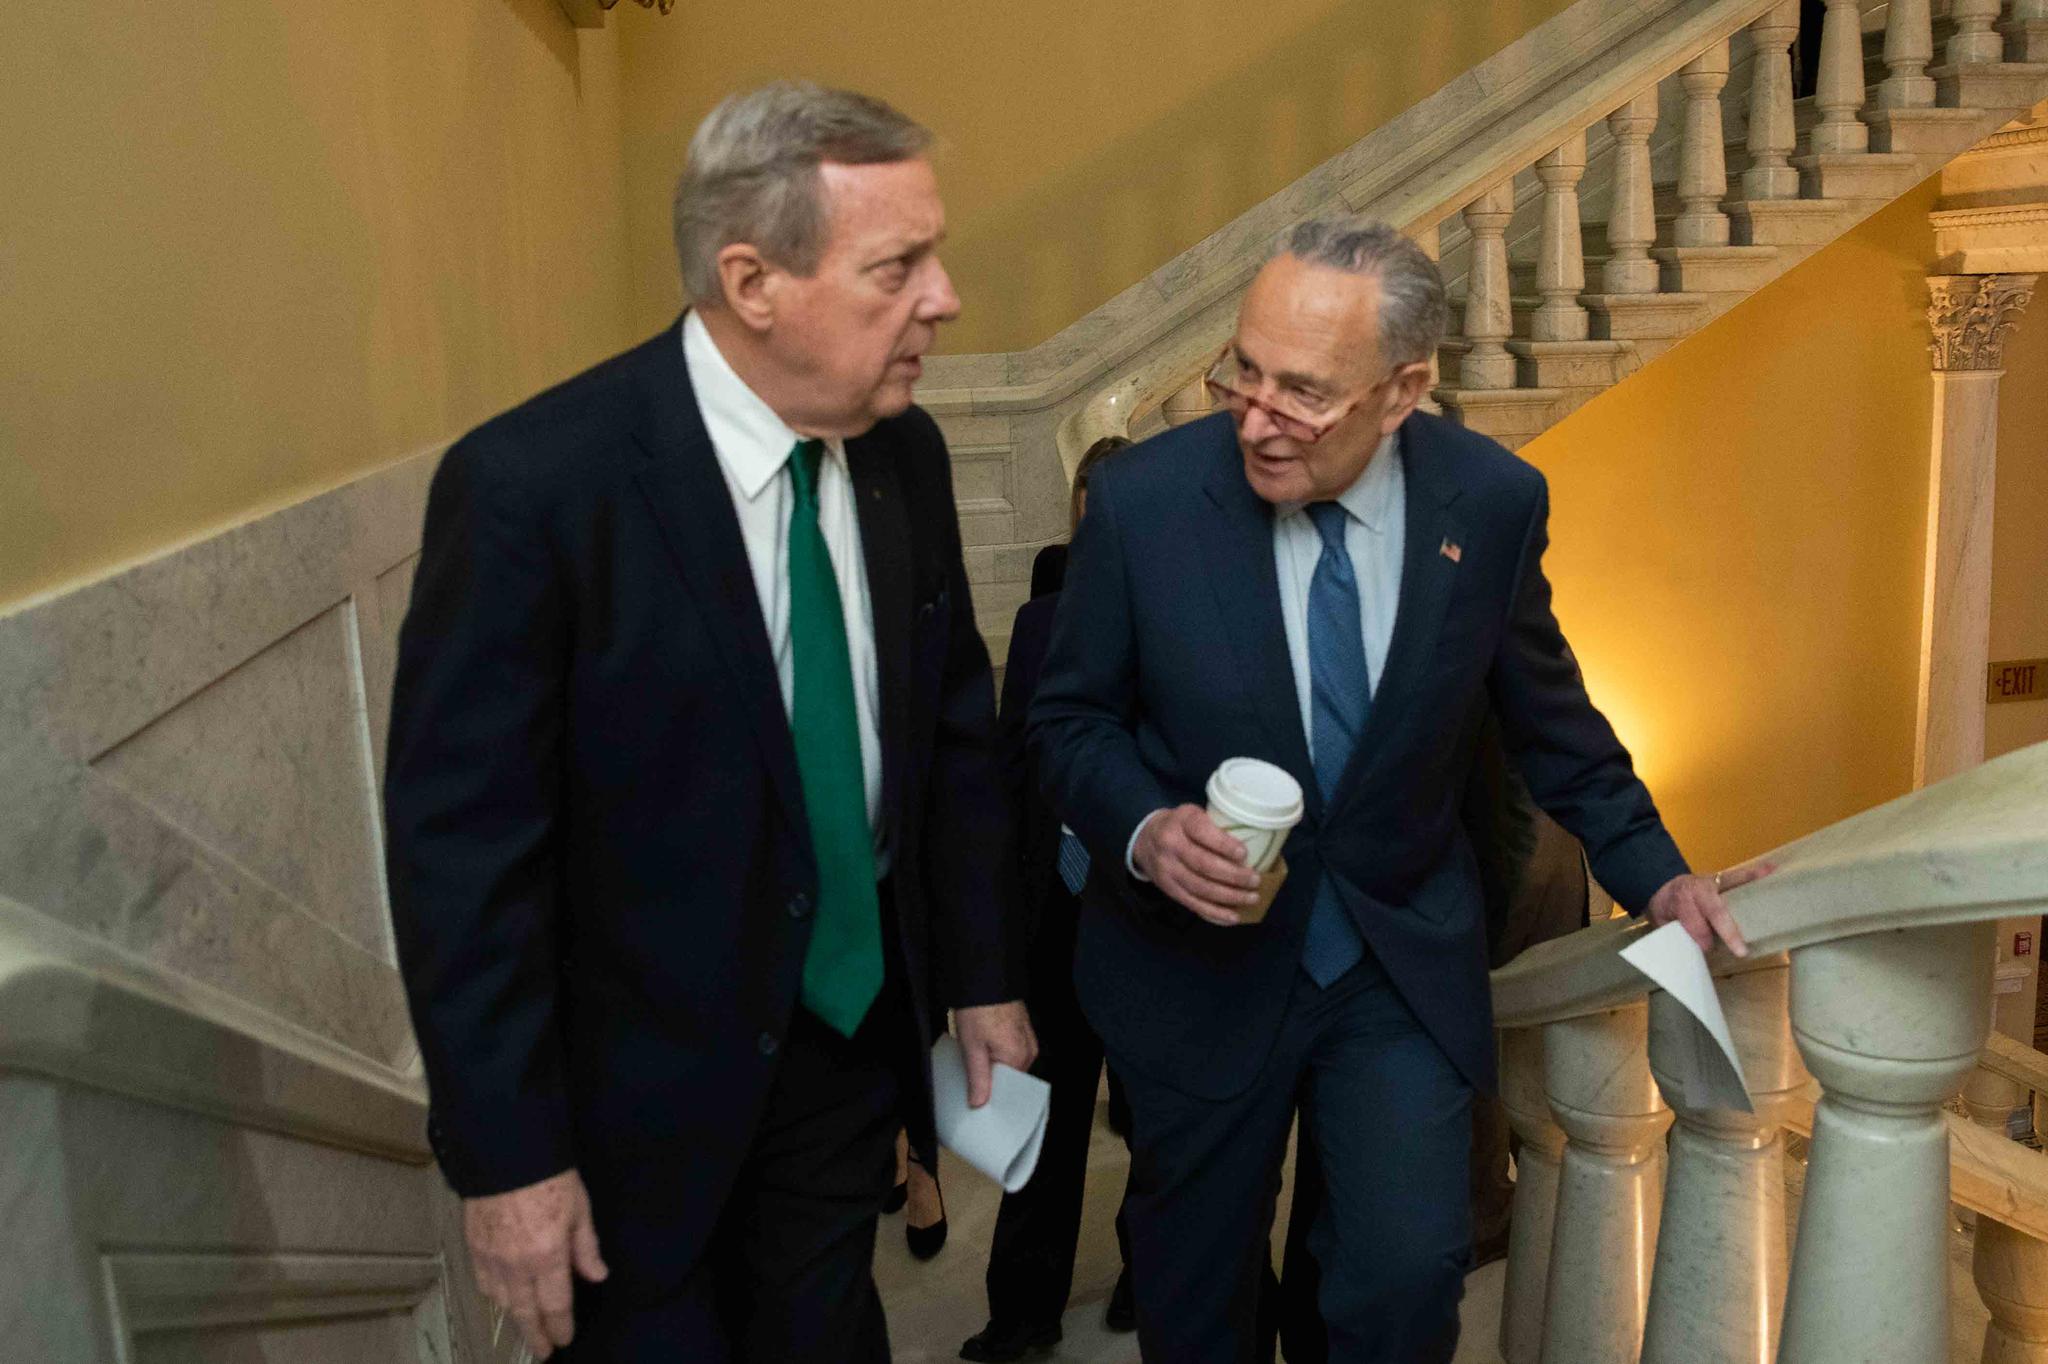 Democratic leader Sen. Chuck Schumer, D-N.Y., right, and Sen. Dick Durbin, D-Ill., walk on the steps in the U.S. Capitol on the first full day of the impeachment trial of President Donald Trump on charges of abuse of power and obstruction of Congress in Washington